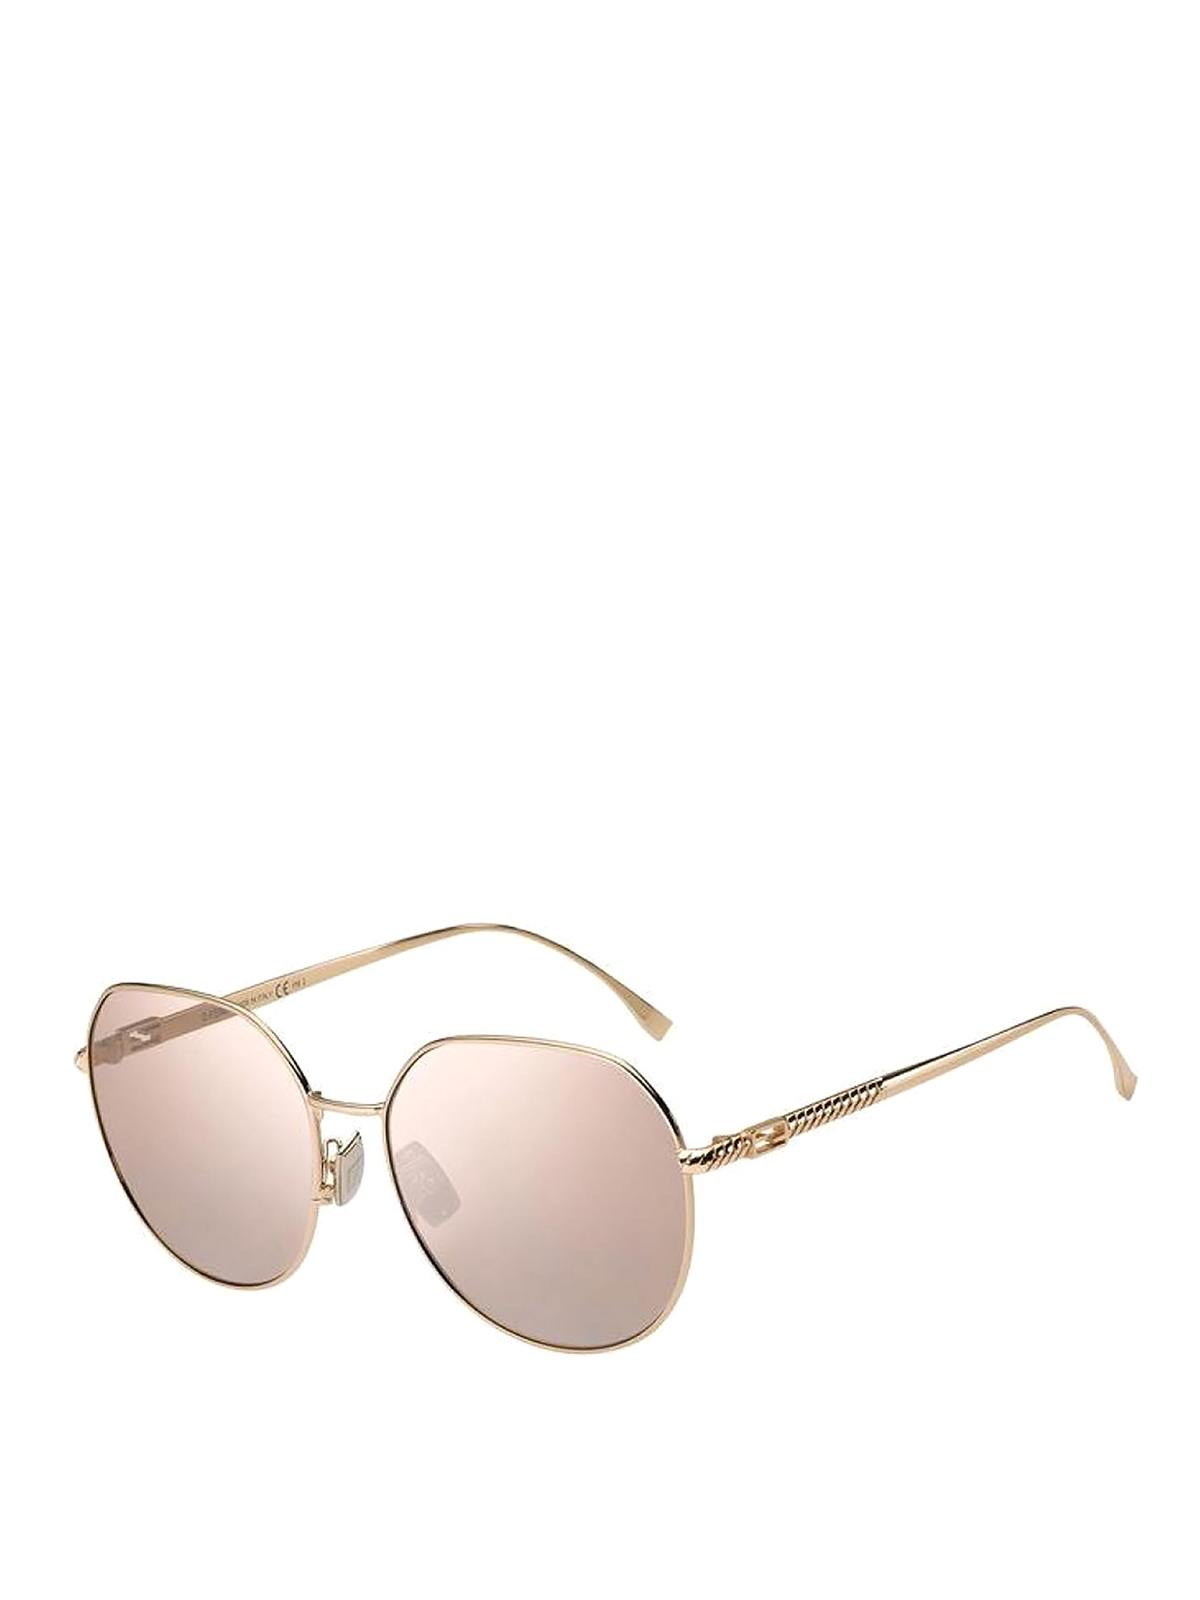 Fendi Rounded Baguette Sunglasses In Gold